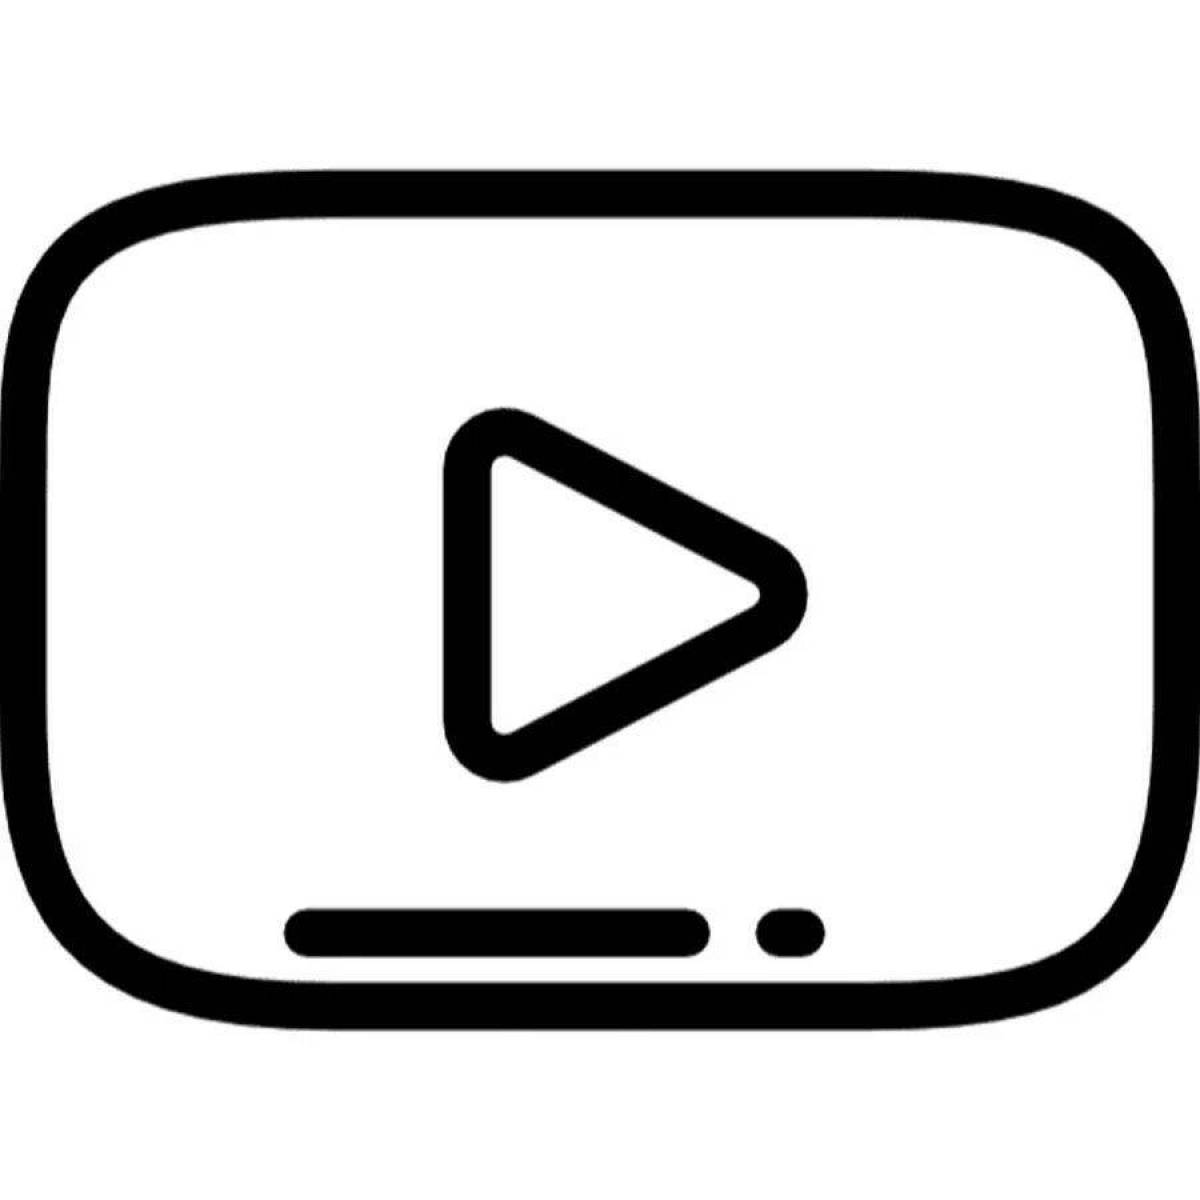 Incredible youtube button coloring page